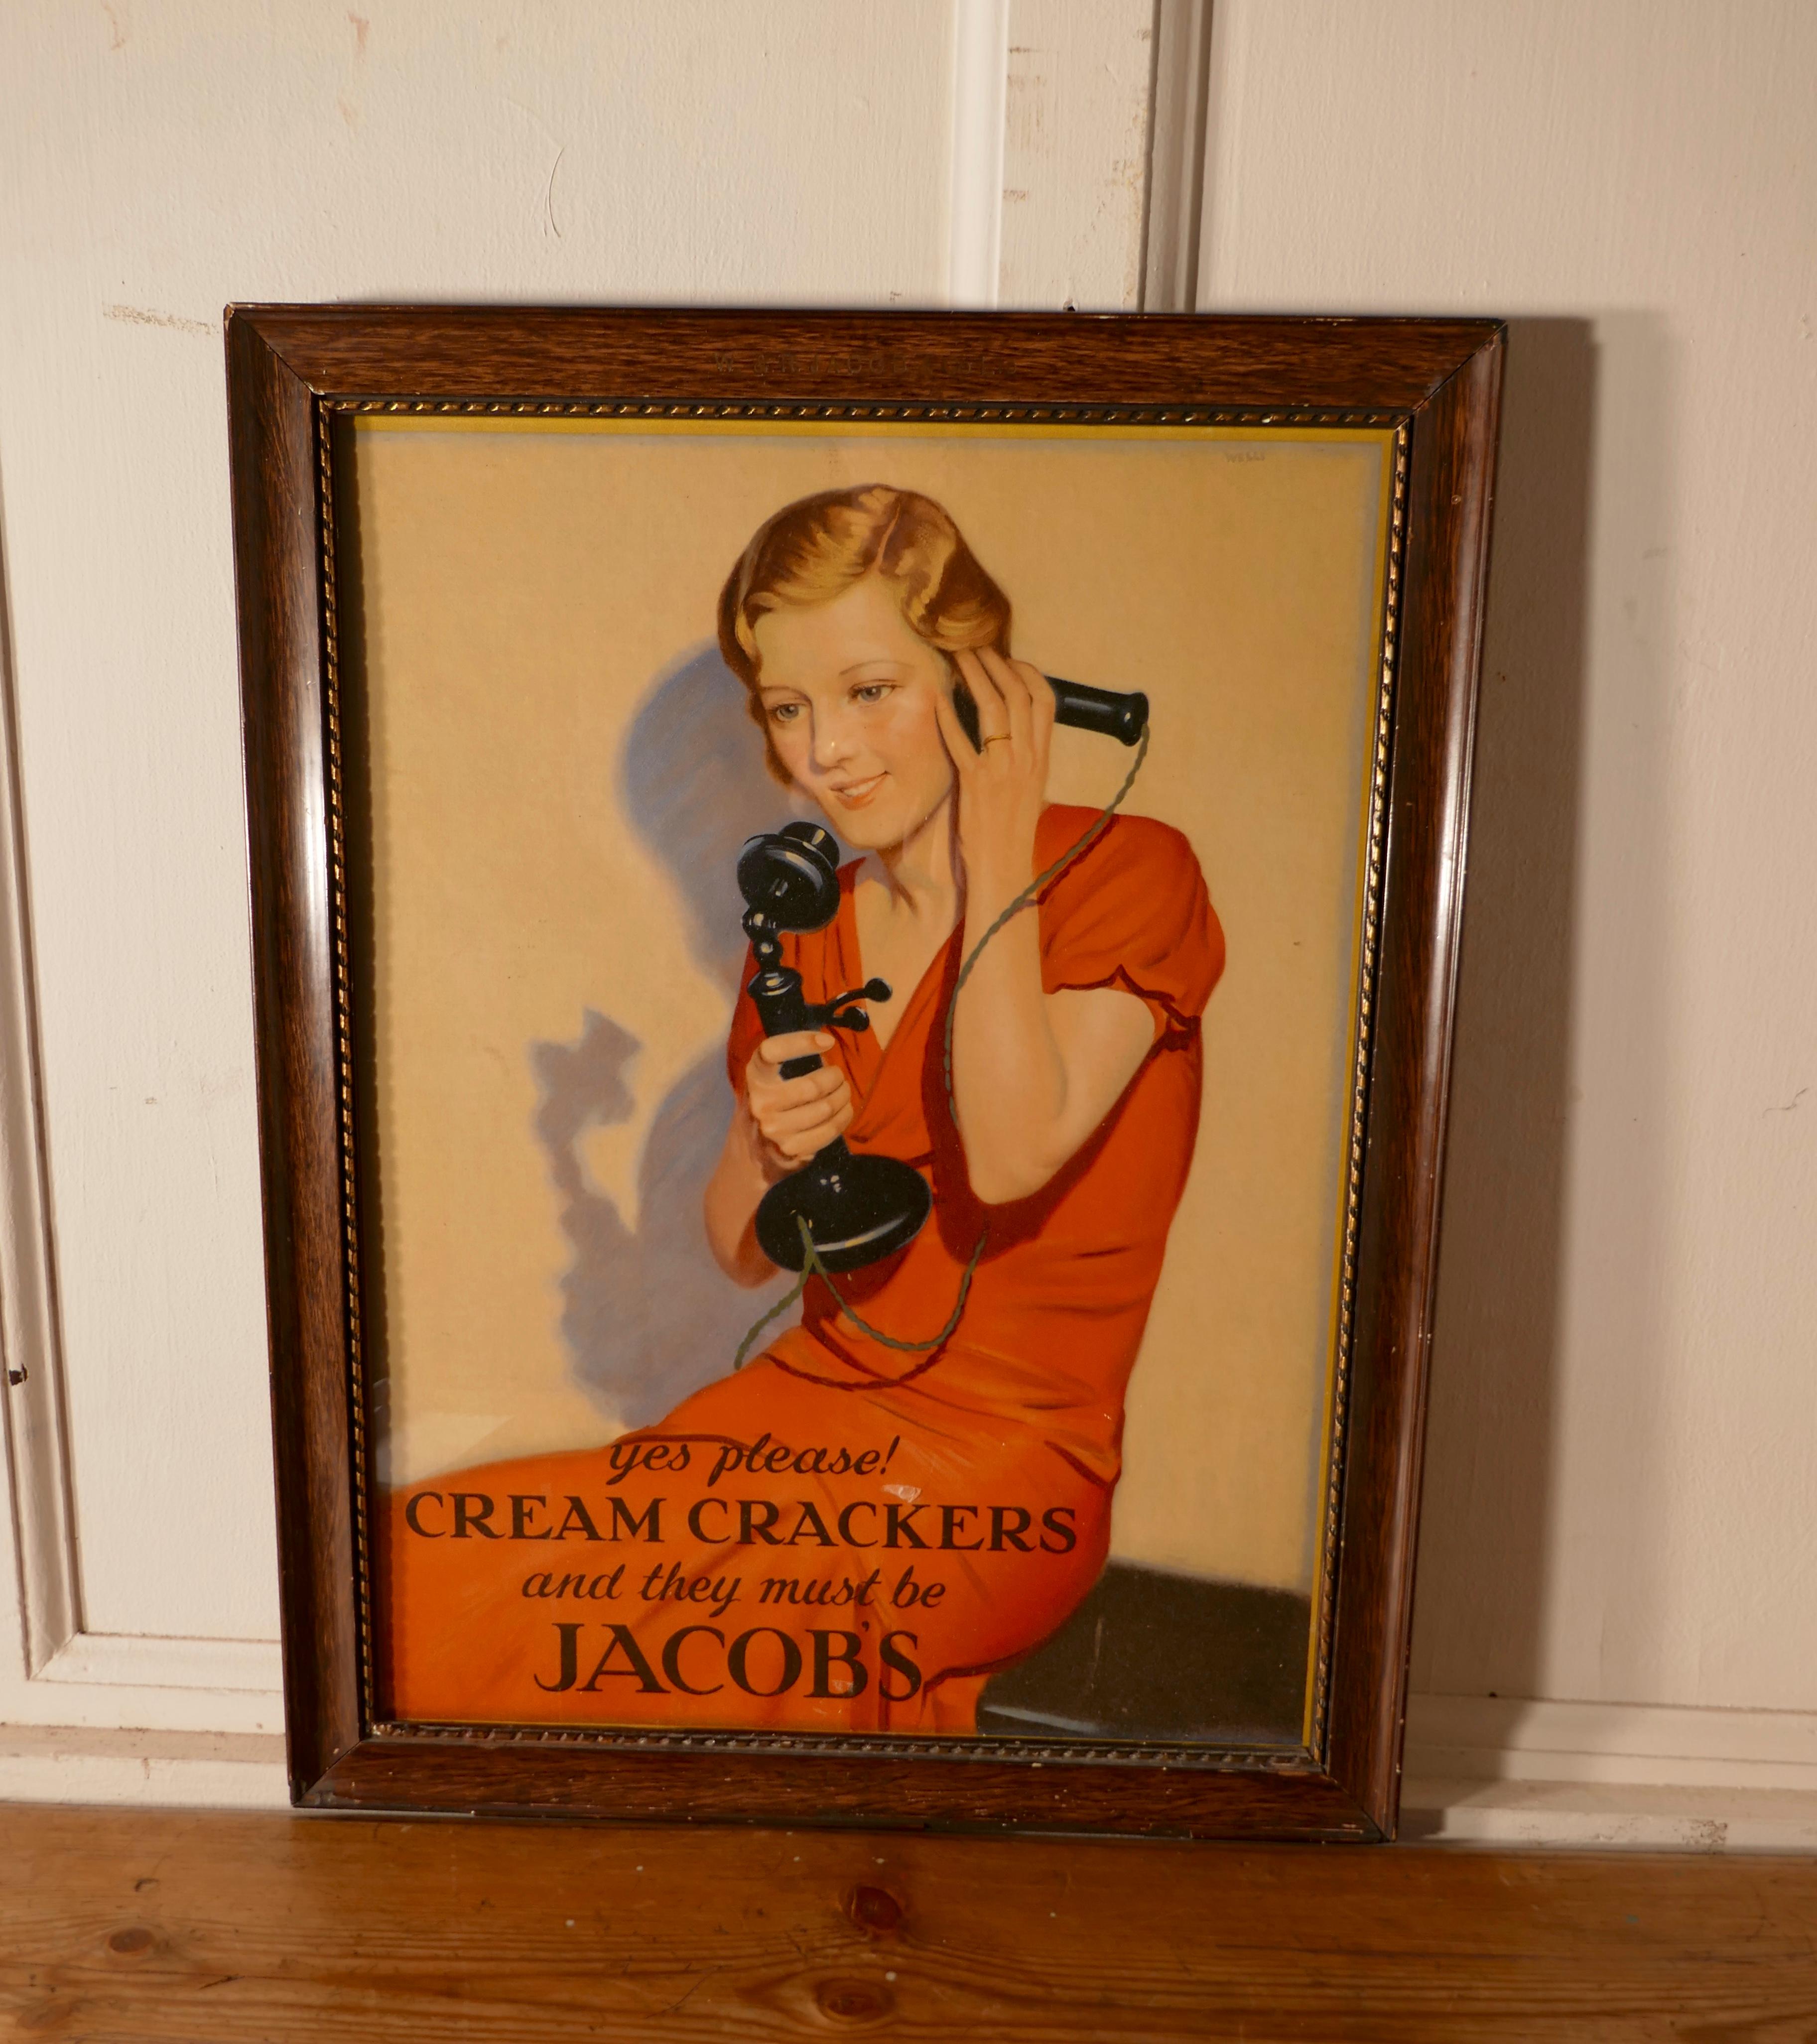 Original framed Jacobs cream crackers card poster, from Dublin

This is delightful original advertising sign, showing a happy young lady in period dress on the telephone telling us , “yes please Cream Crackers and they must be Jacobs”
The sign is